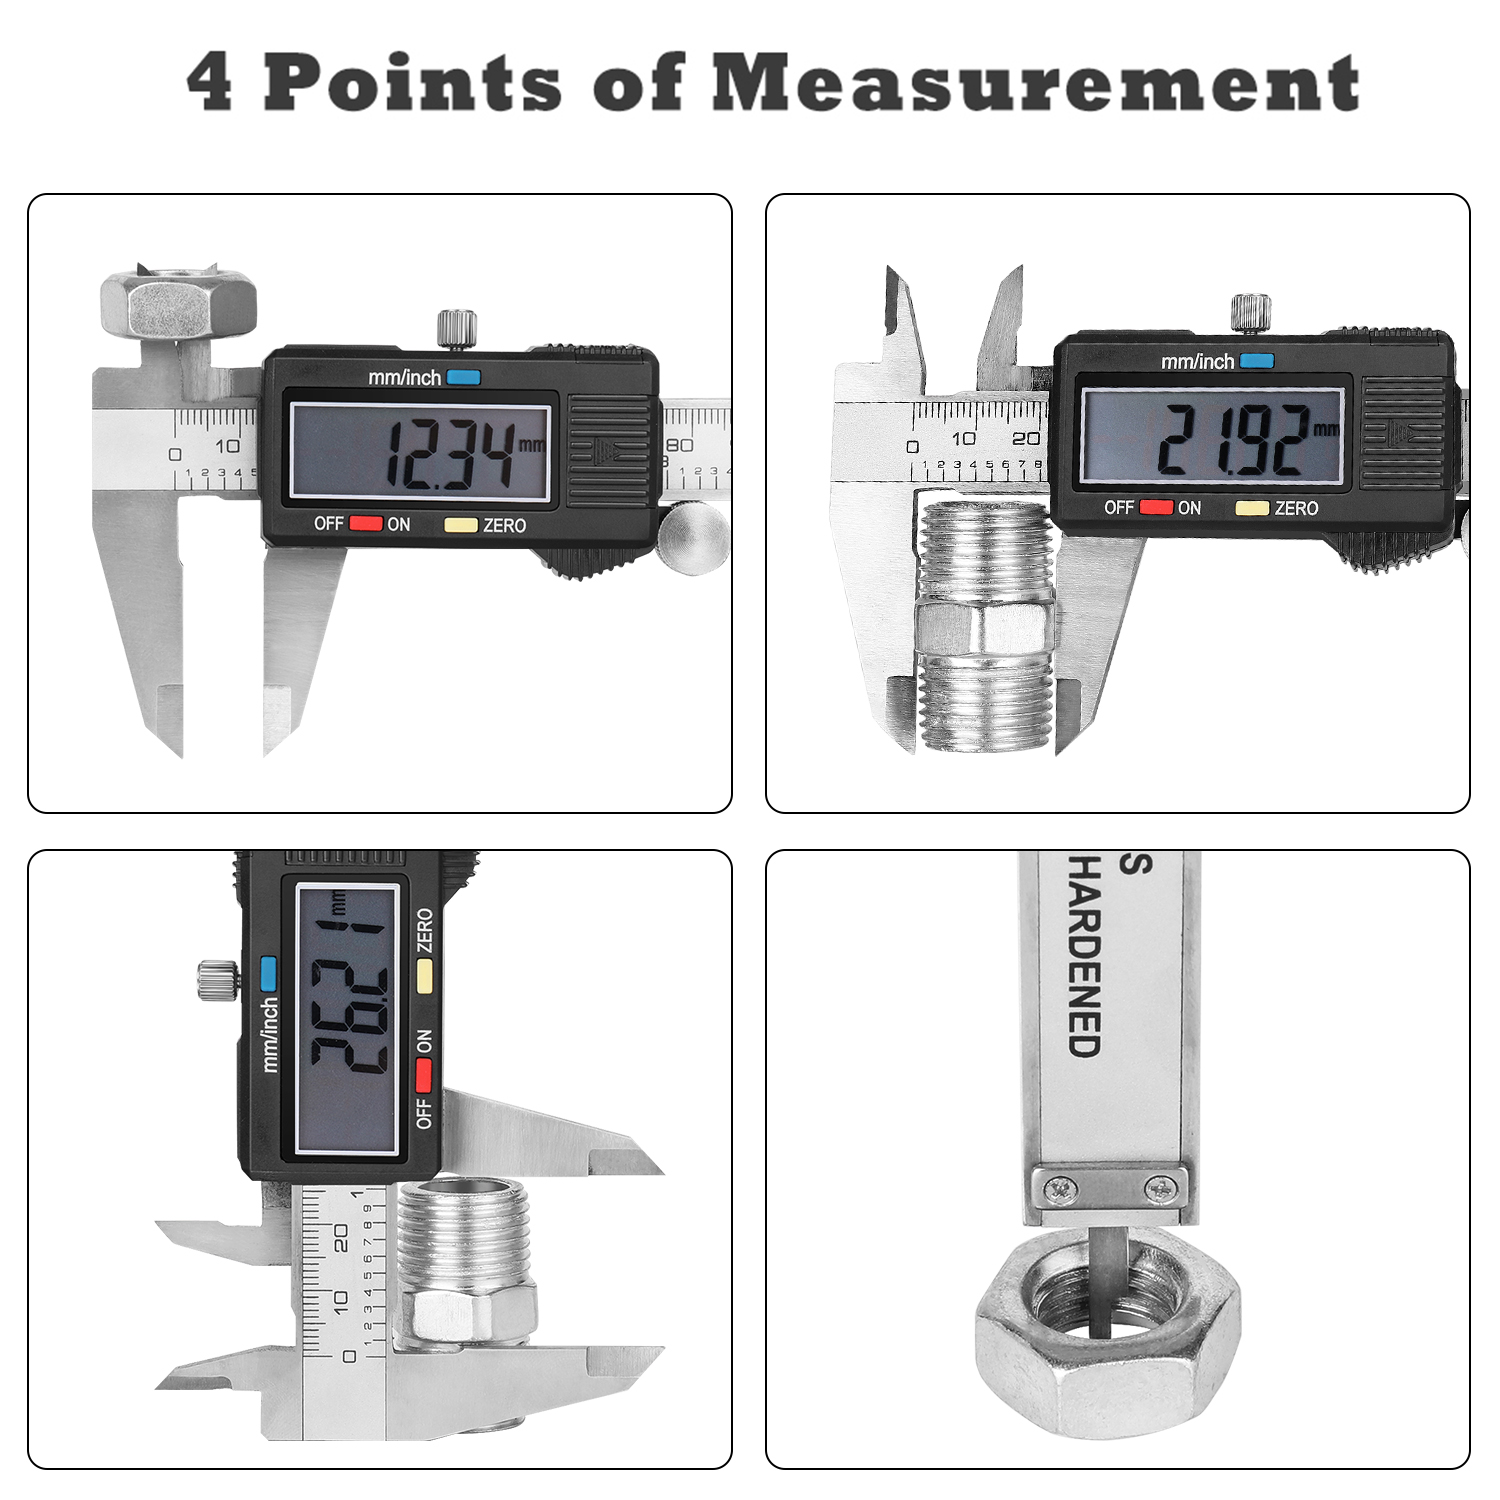 Versatile Measurement Options - Our digital slide calipers are versatile enough for various applications, including depth and step measurements, from jewelry to pipe diameters.